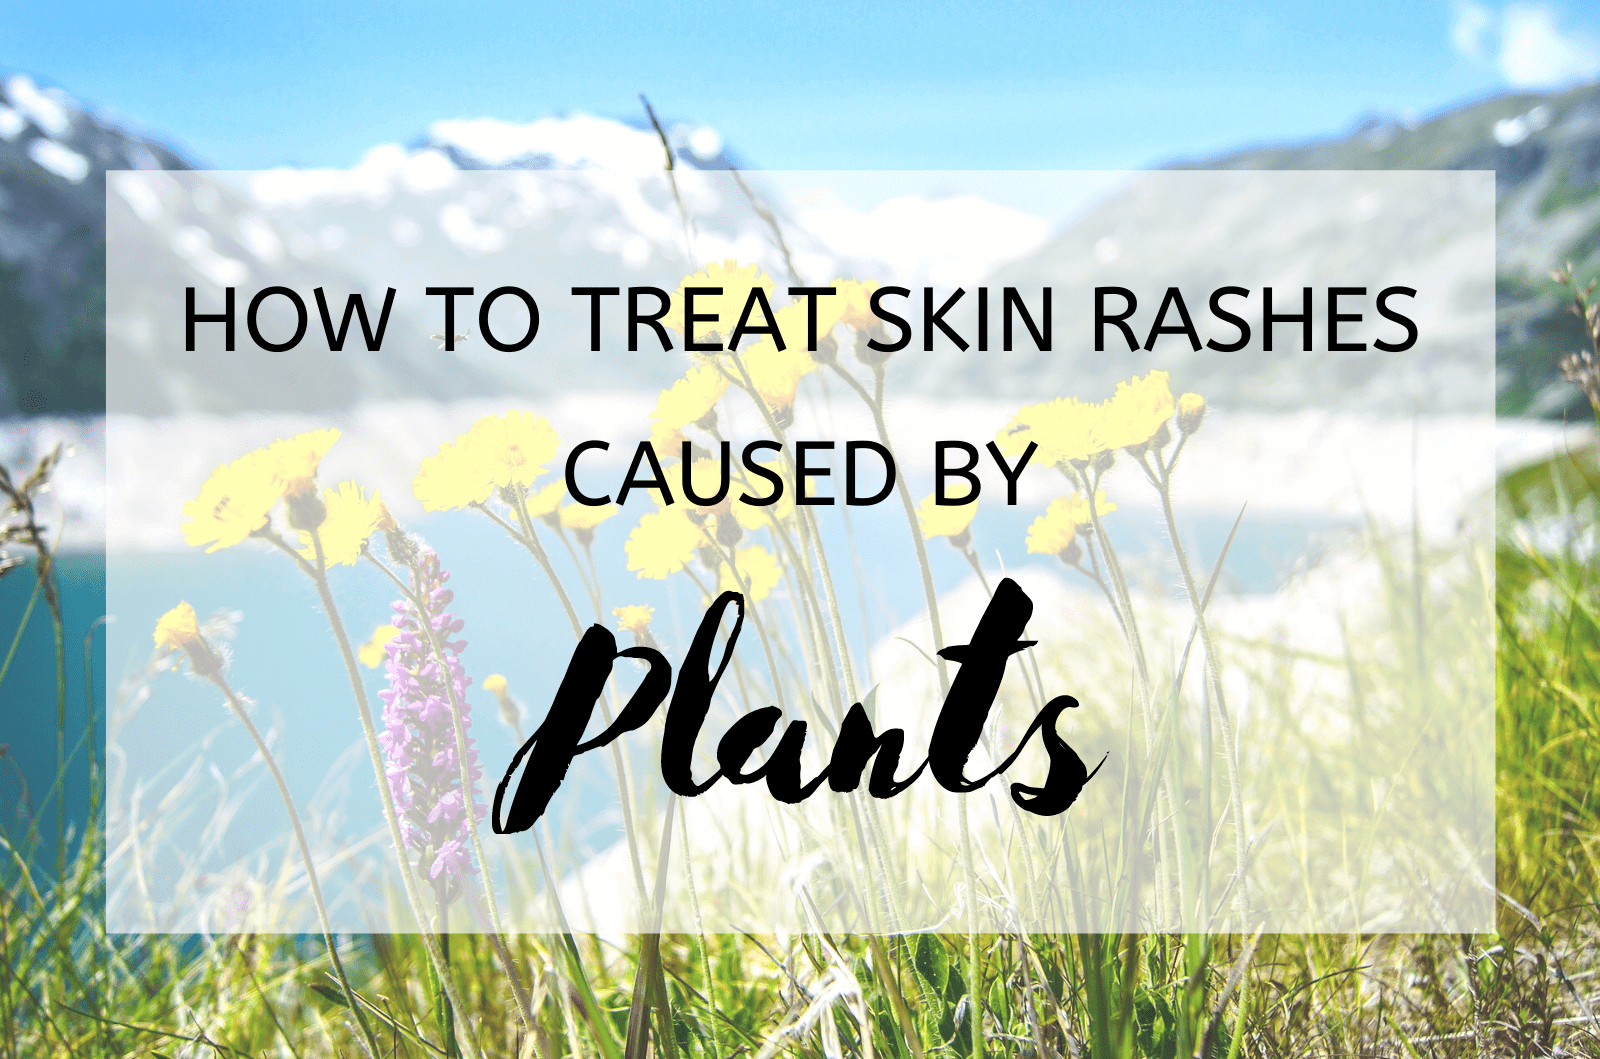 How To Treat Skin Rashes Caused By Plants